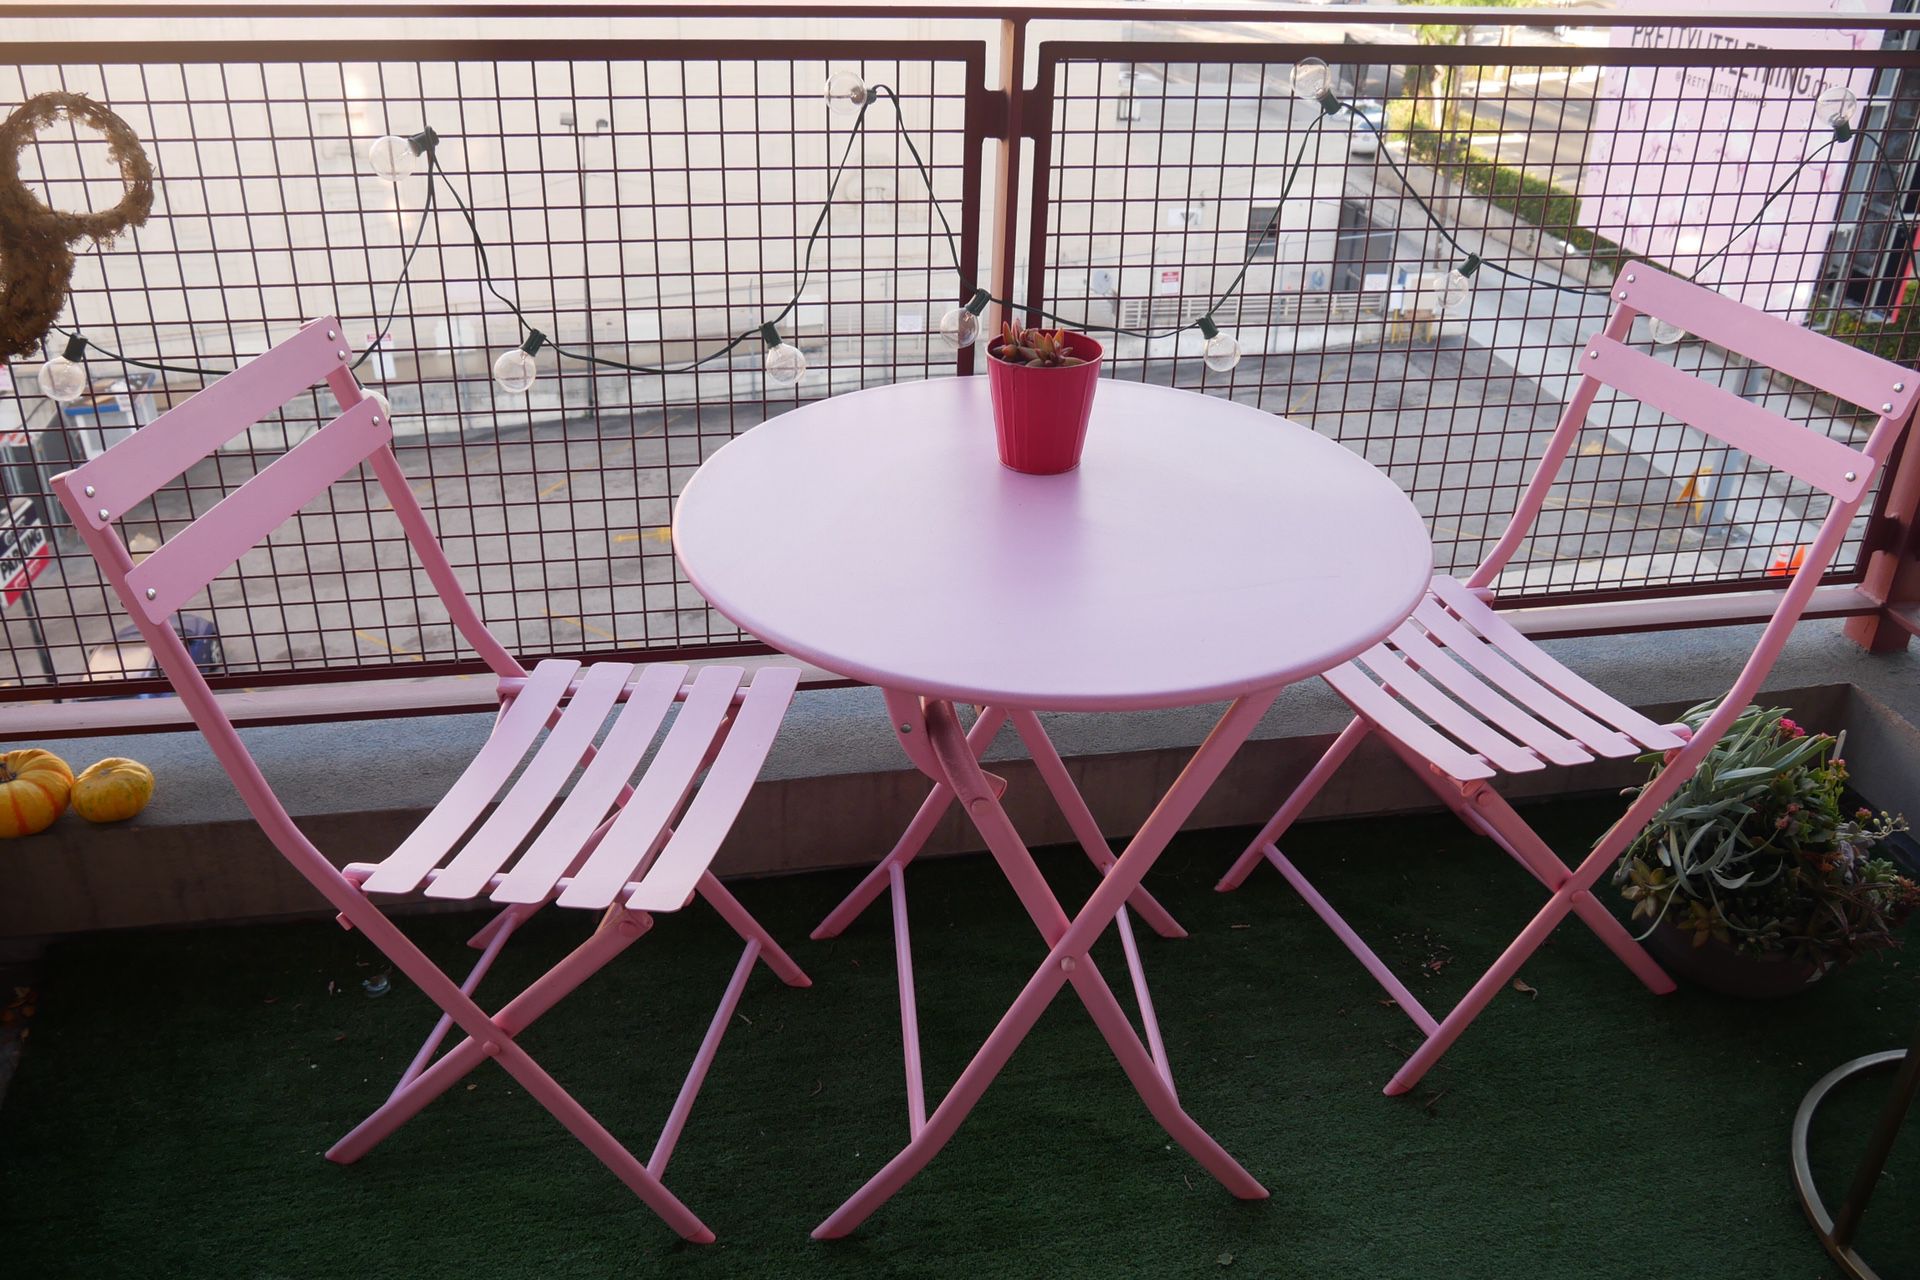 Giantex 3 PC Folding Bistro-Style Patio Table and Chair Set Outdoor Patio Garden Pool Backyard Furniture (Pink)